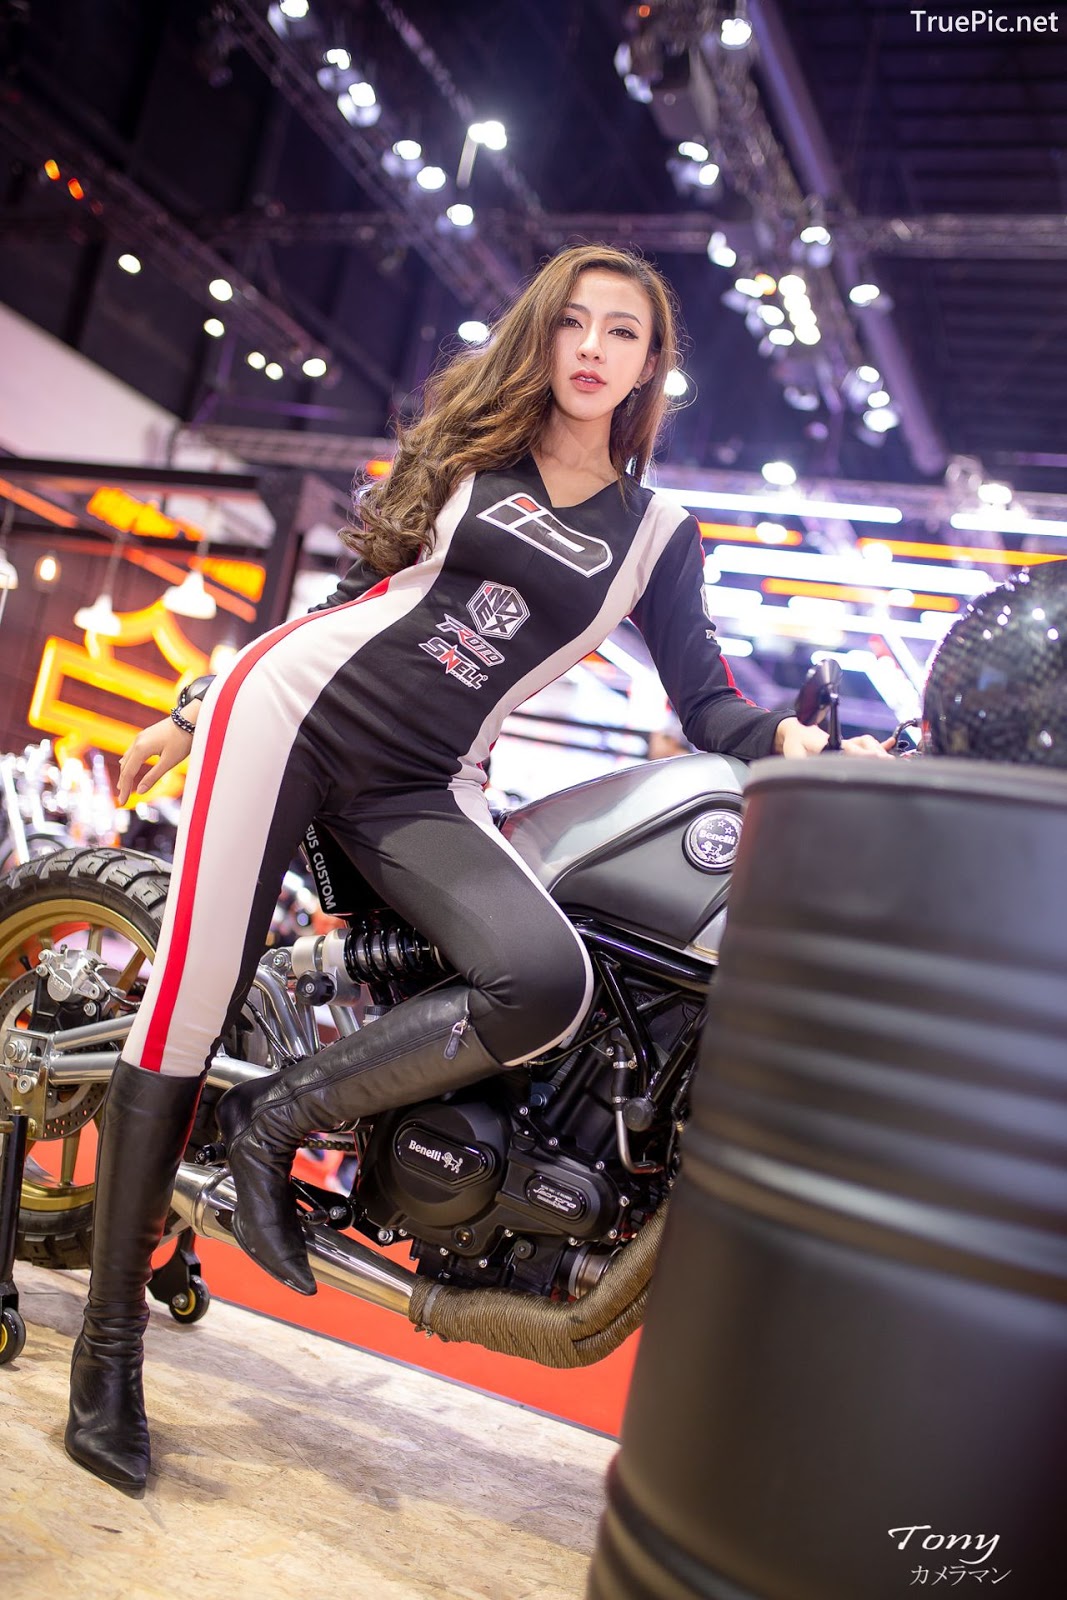 Image-Thailand-Hot-Model-Thai-Racing-Girl-At-Motor-Show-2019-TruePic.net- Picture-16